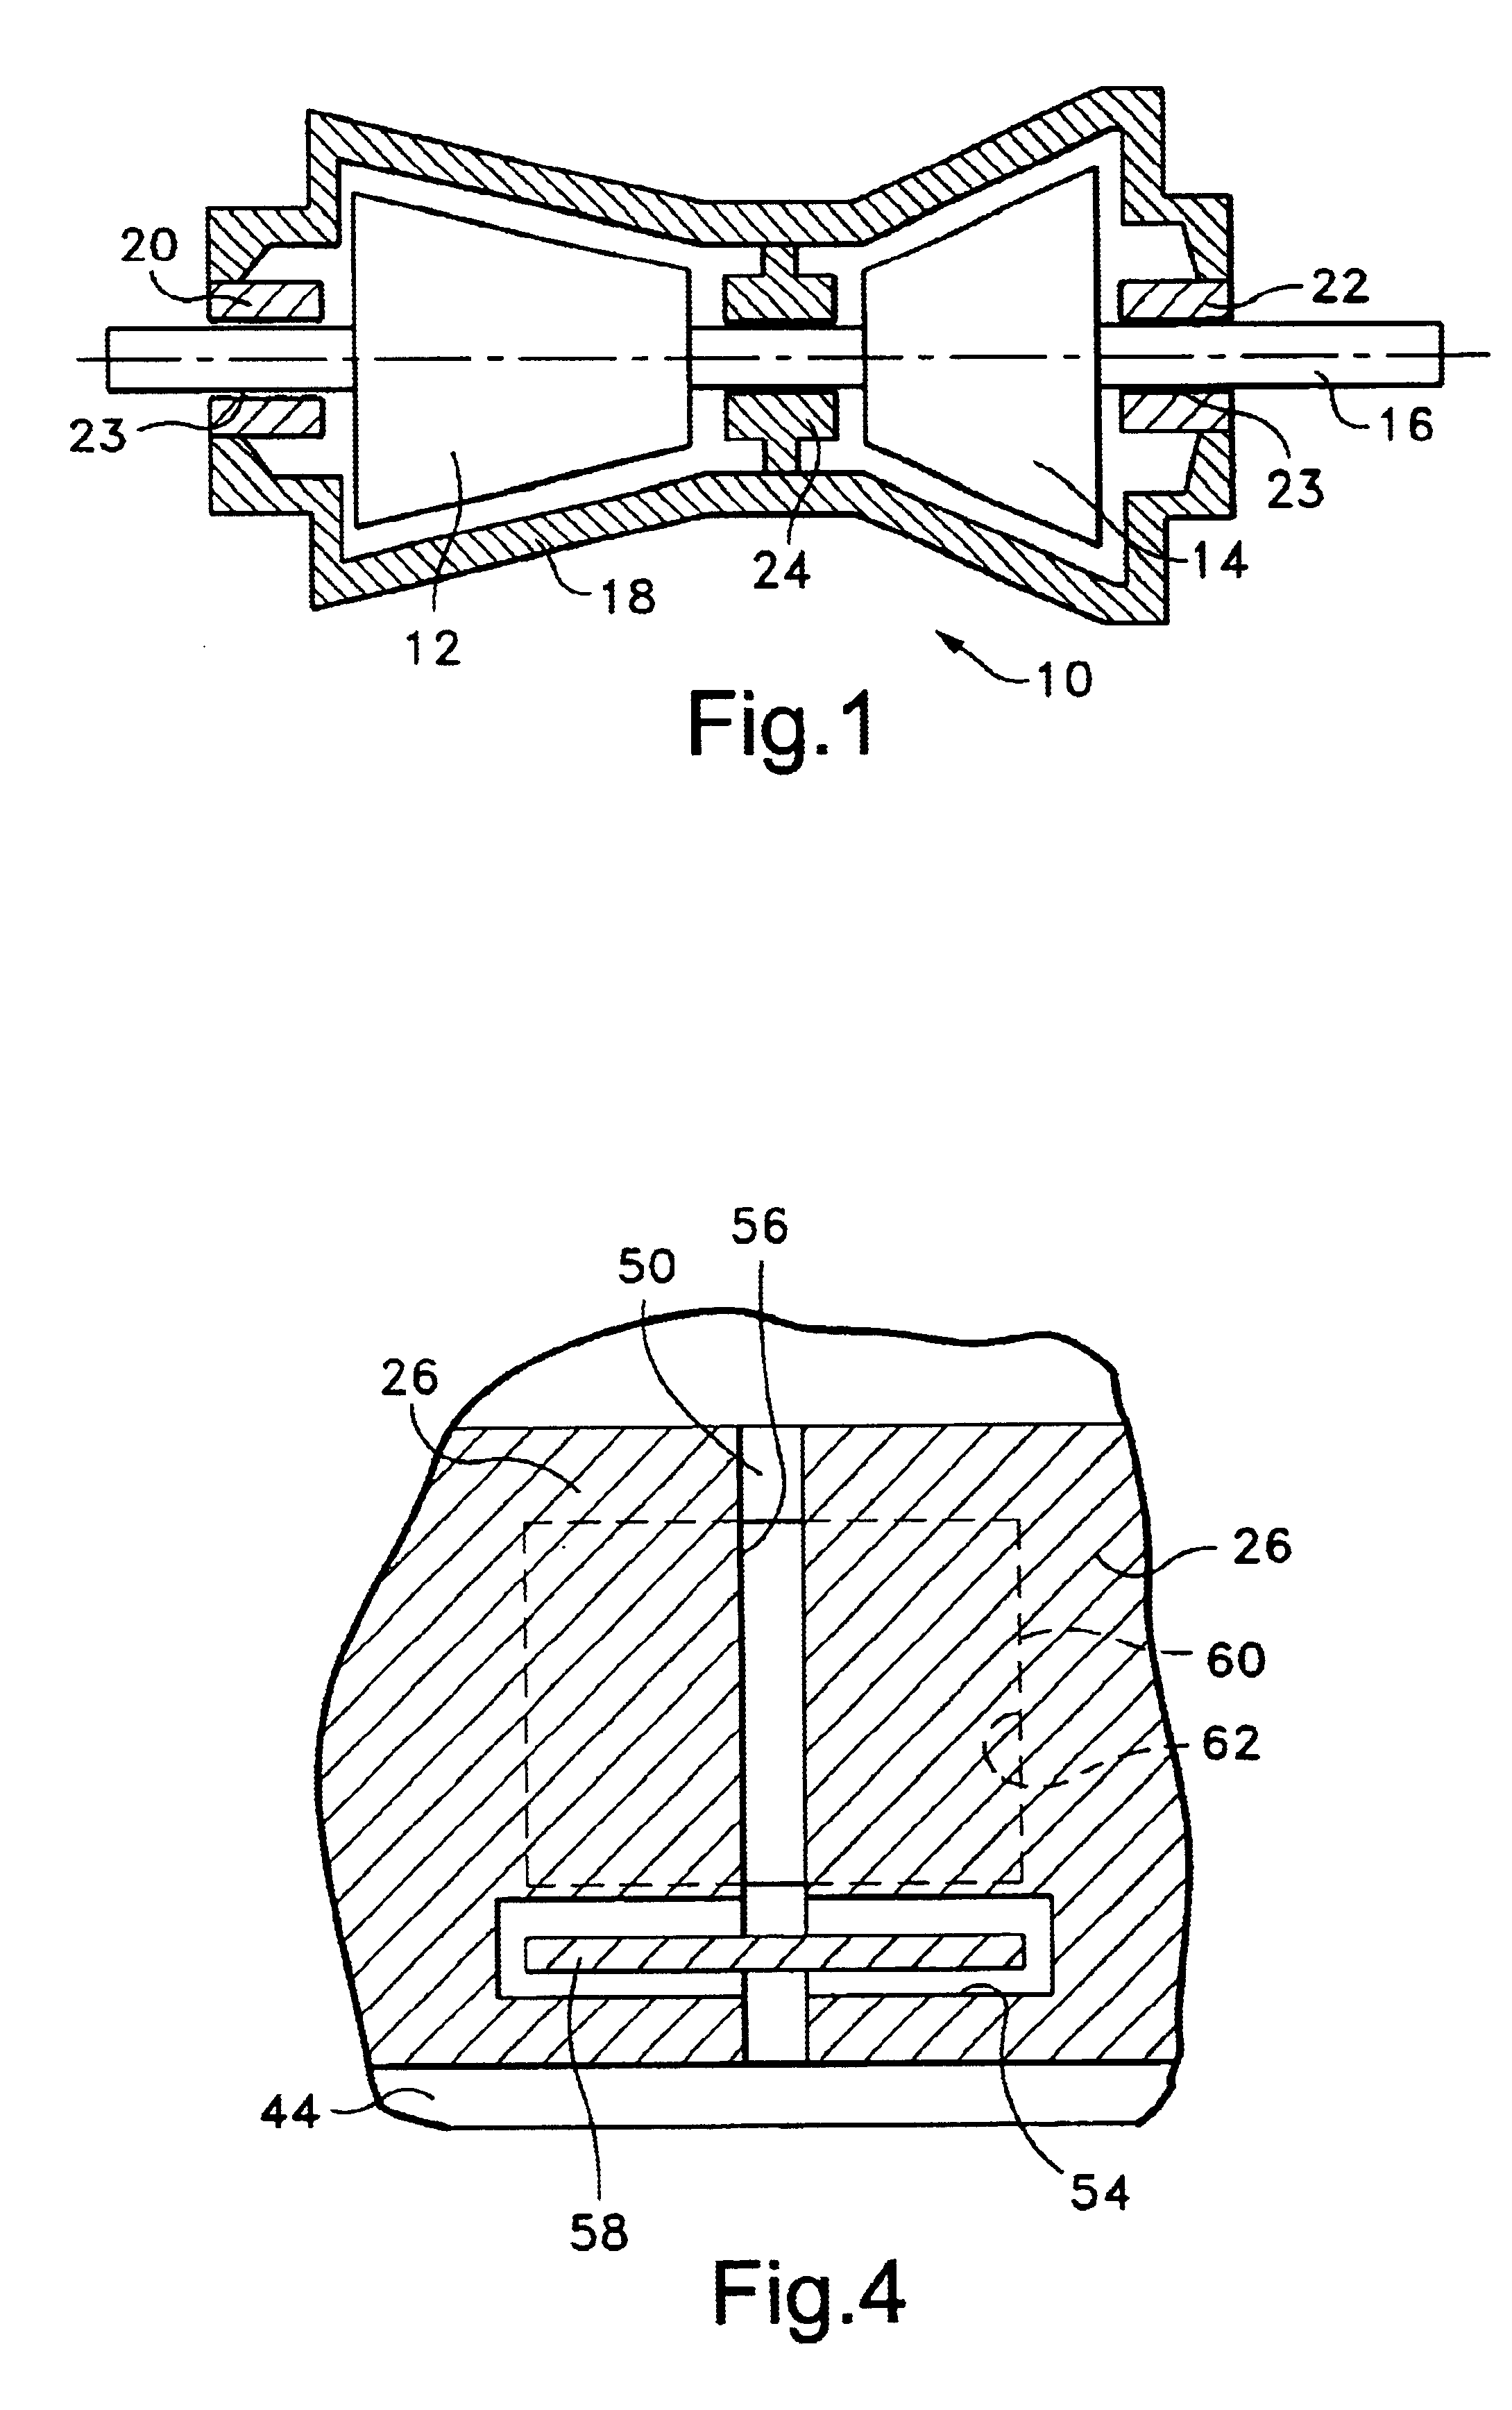 Endface gap sealing of steam turbine packing seal segments and retrofitting thereof